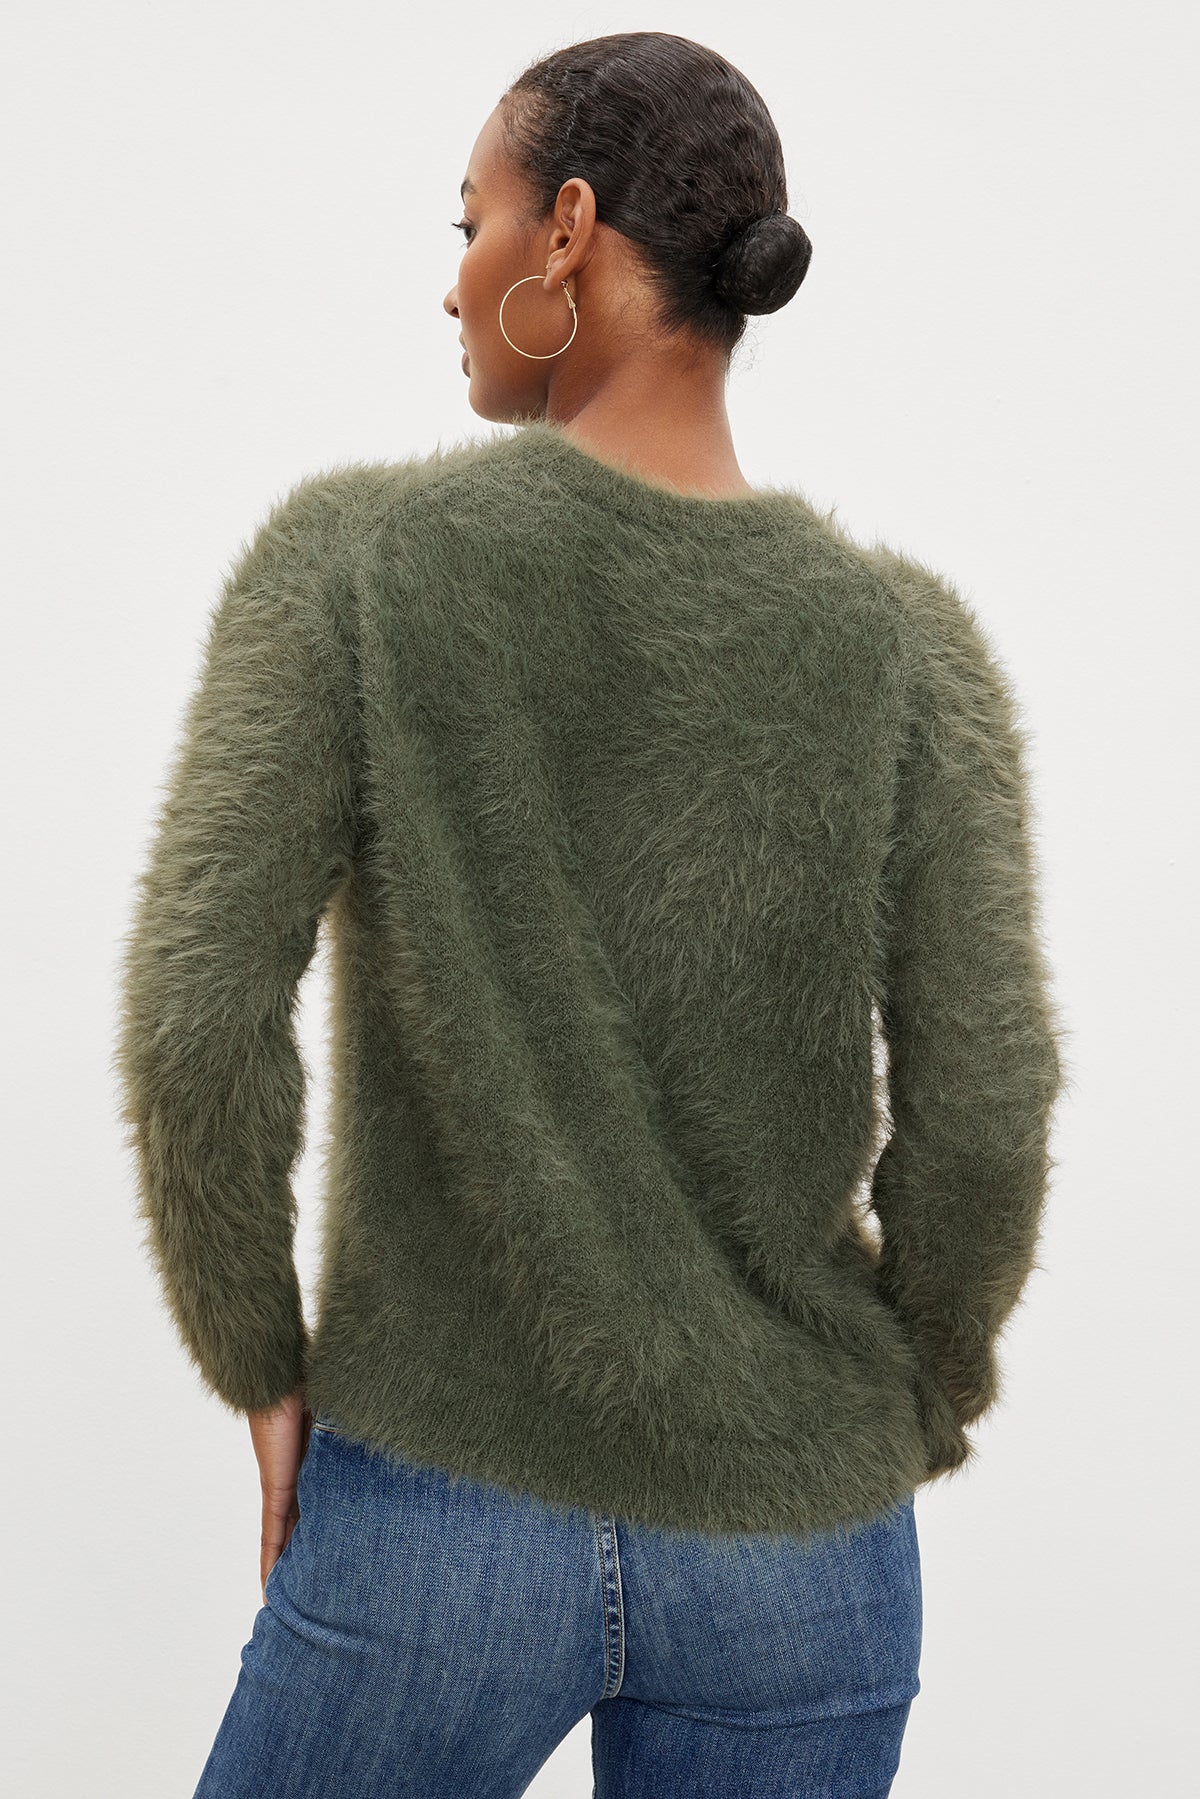 The back view of a woman wearing a Velvet by Graham & Spencer RAY FEATHER YARN CREW NECK SWEATER in a green fuzzy texture.-35572002652353